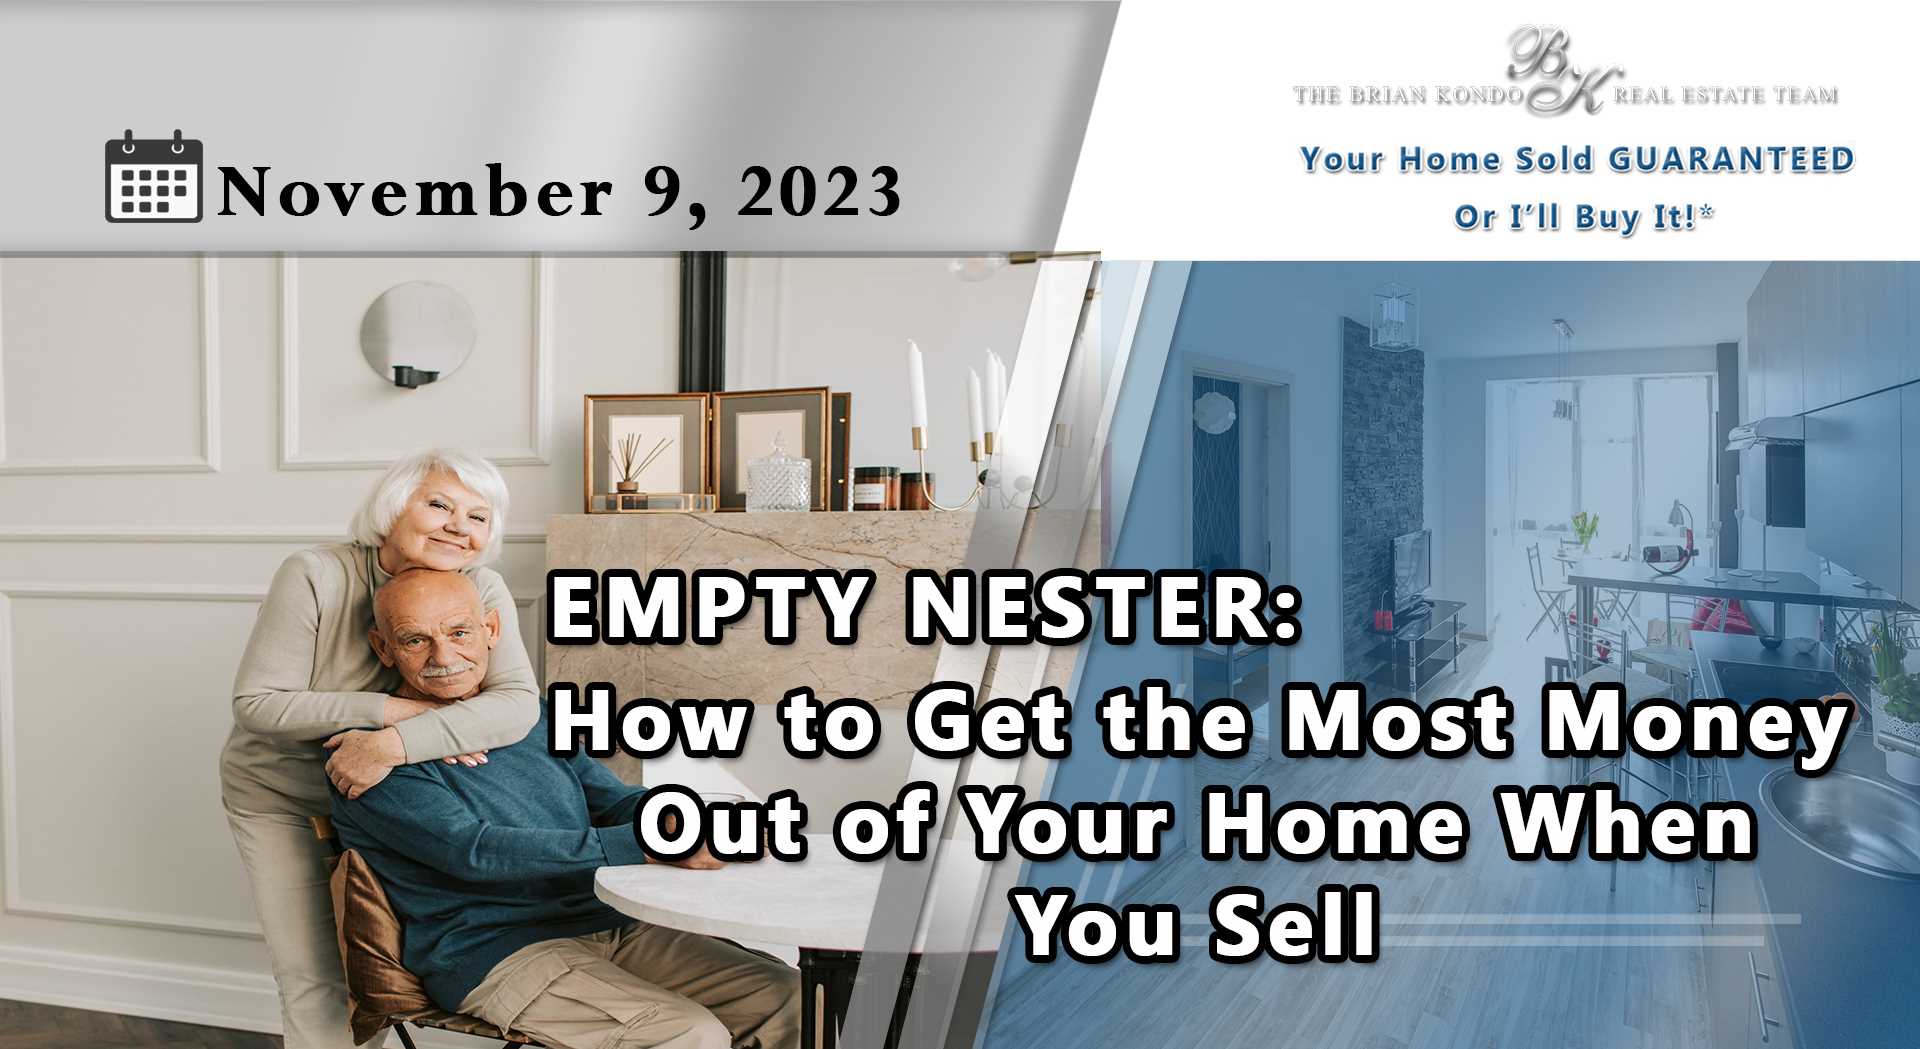 Empty Nester: How to Get the Most Money Out of Your Home When You Sell